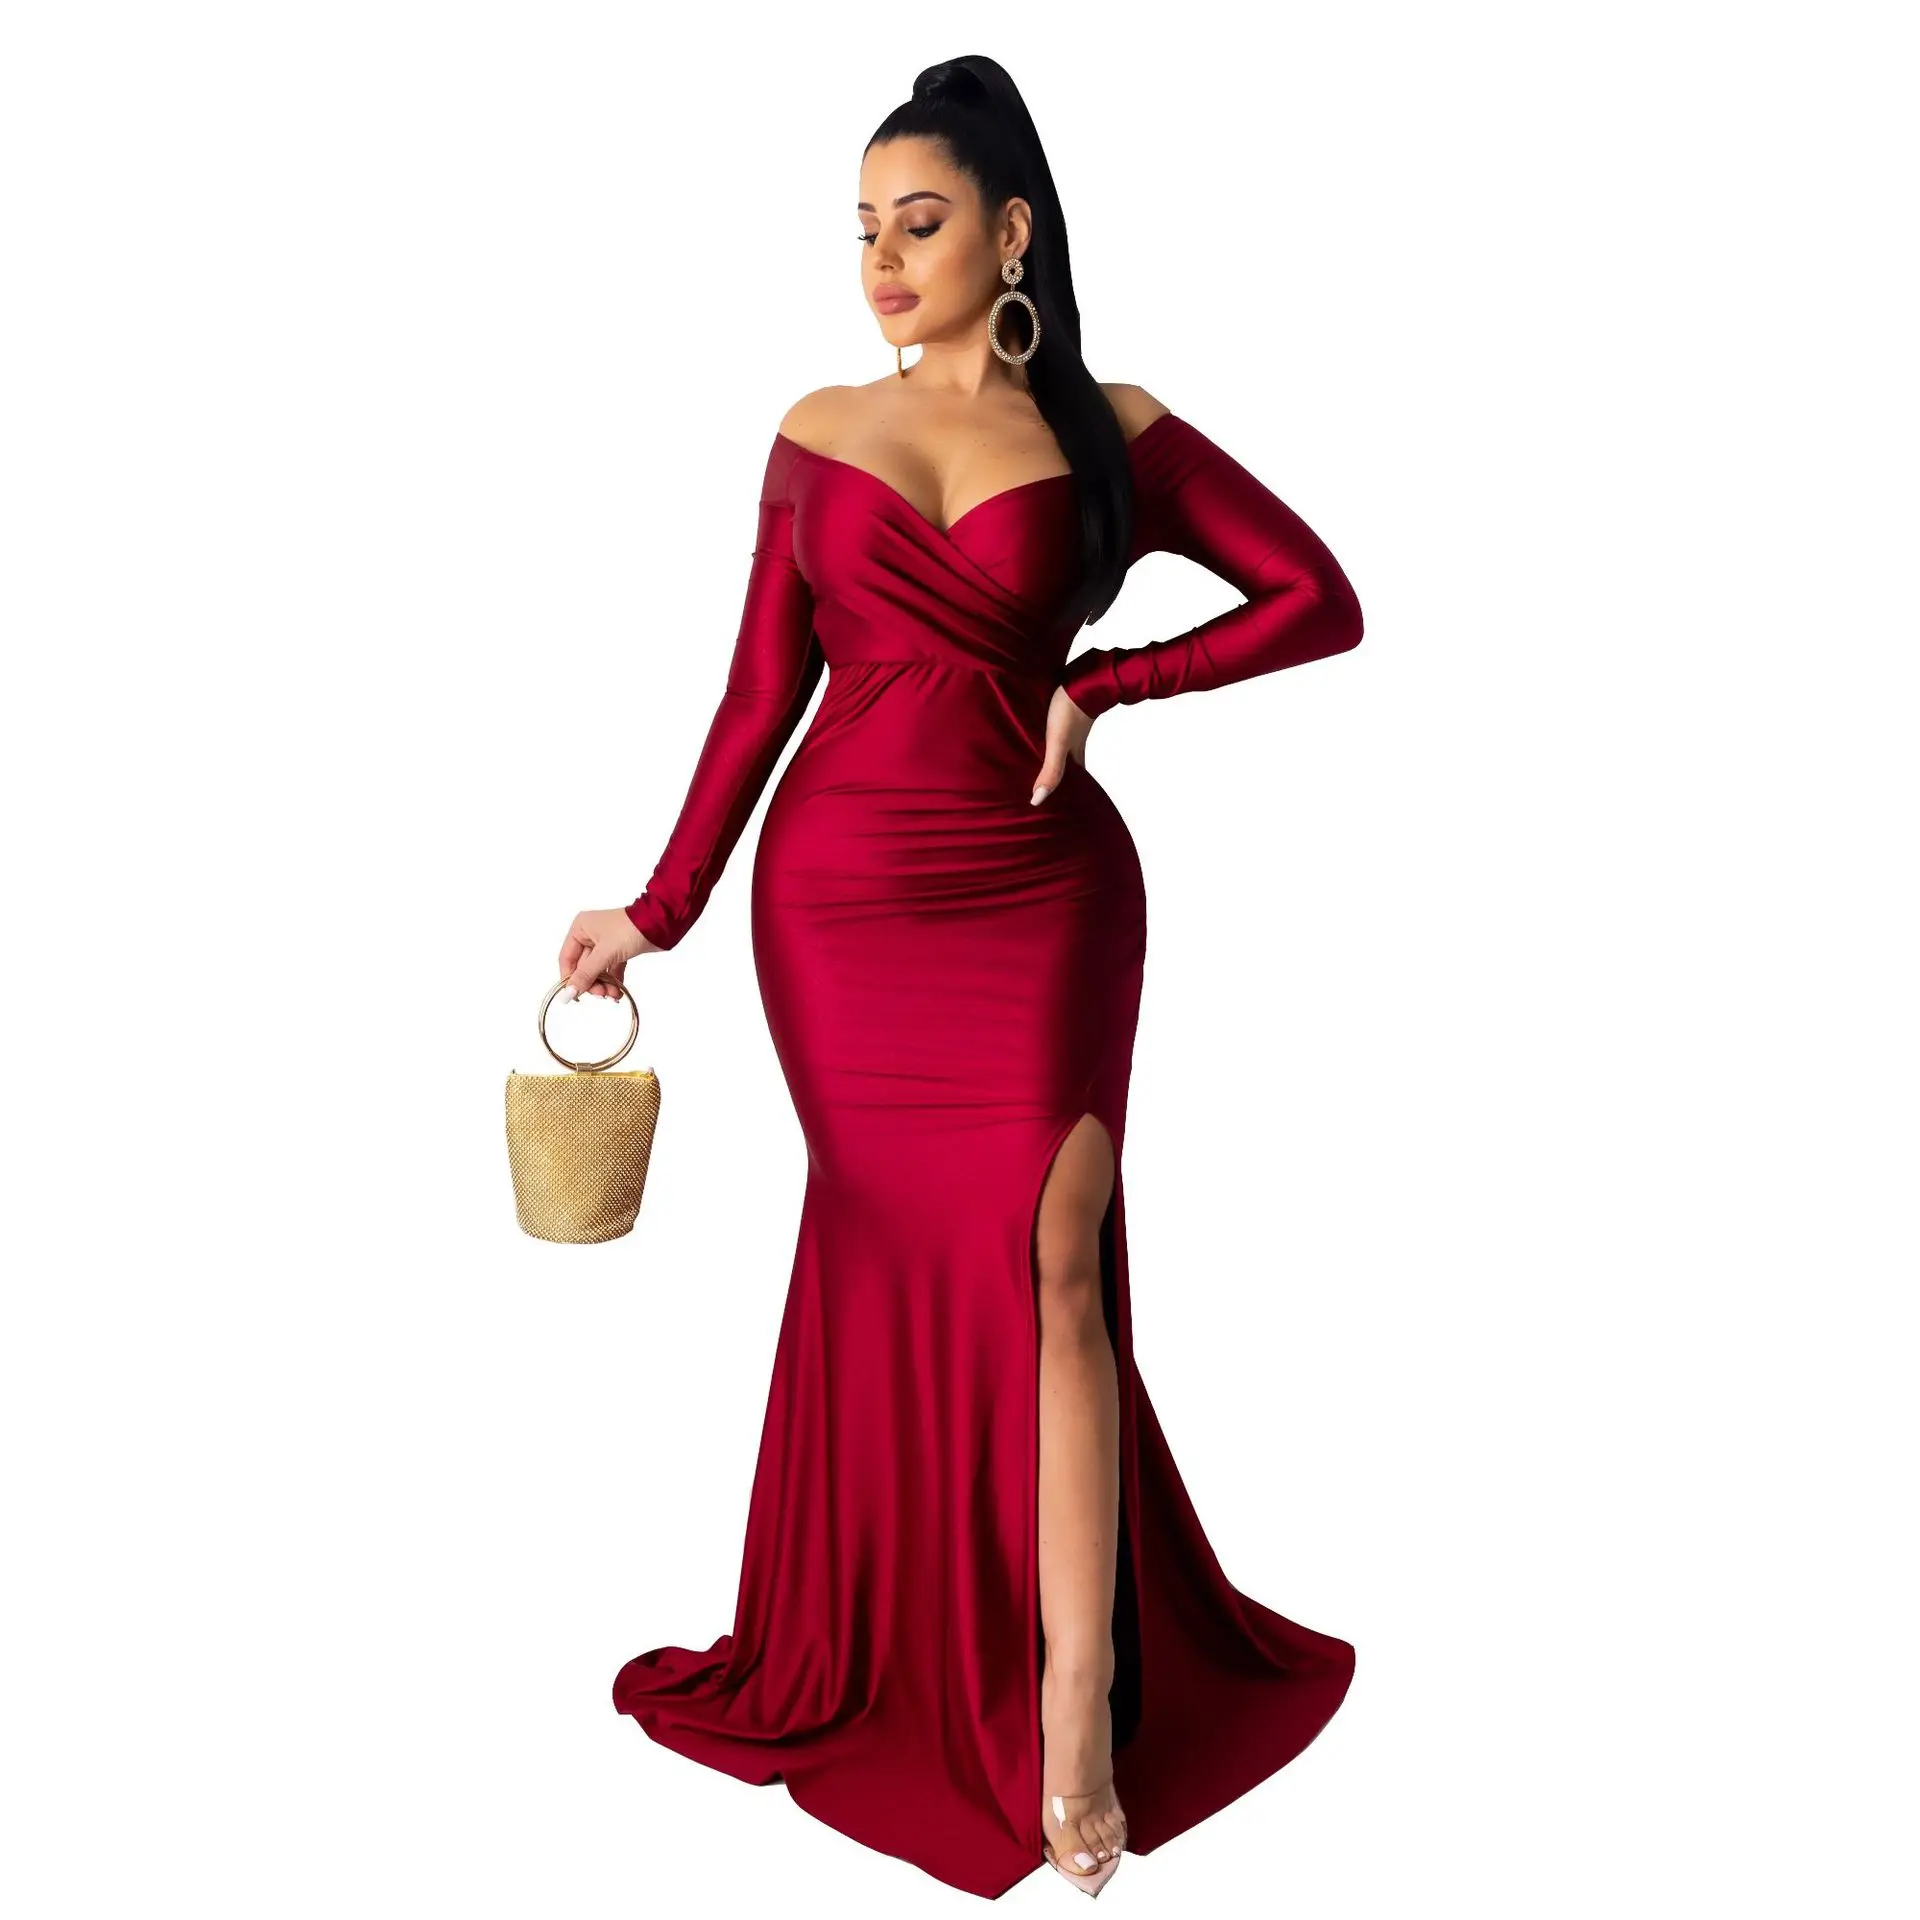 

2022 Women Party Dresses for Weddings Evening Dress Sexy Full Sleeve Split Cocktail Robes Prom Gown Celebrity Nigh Club Vestidos